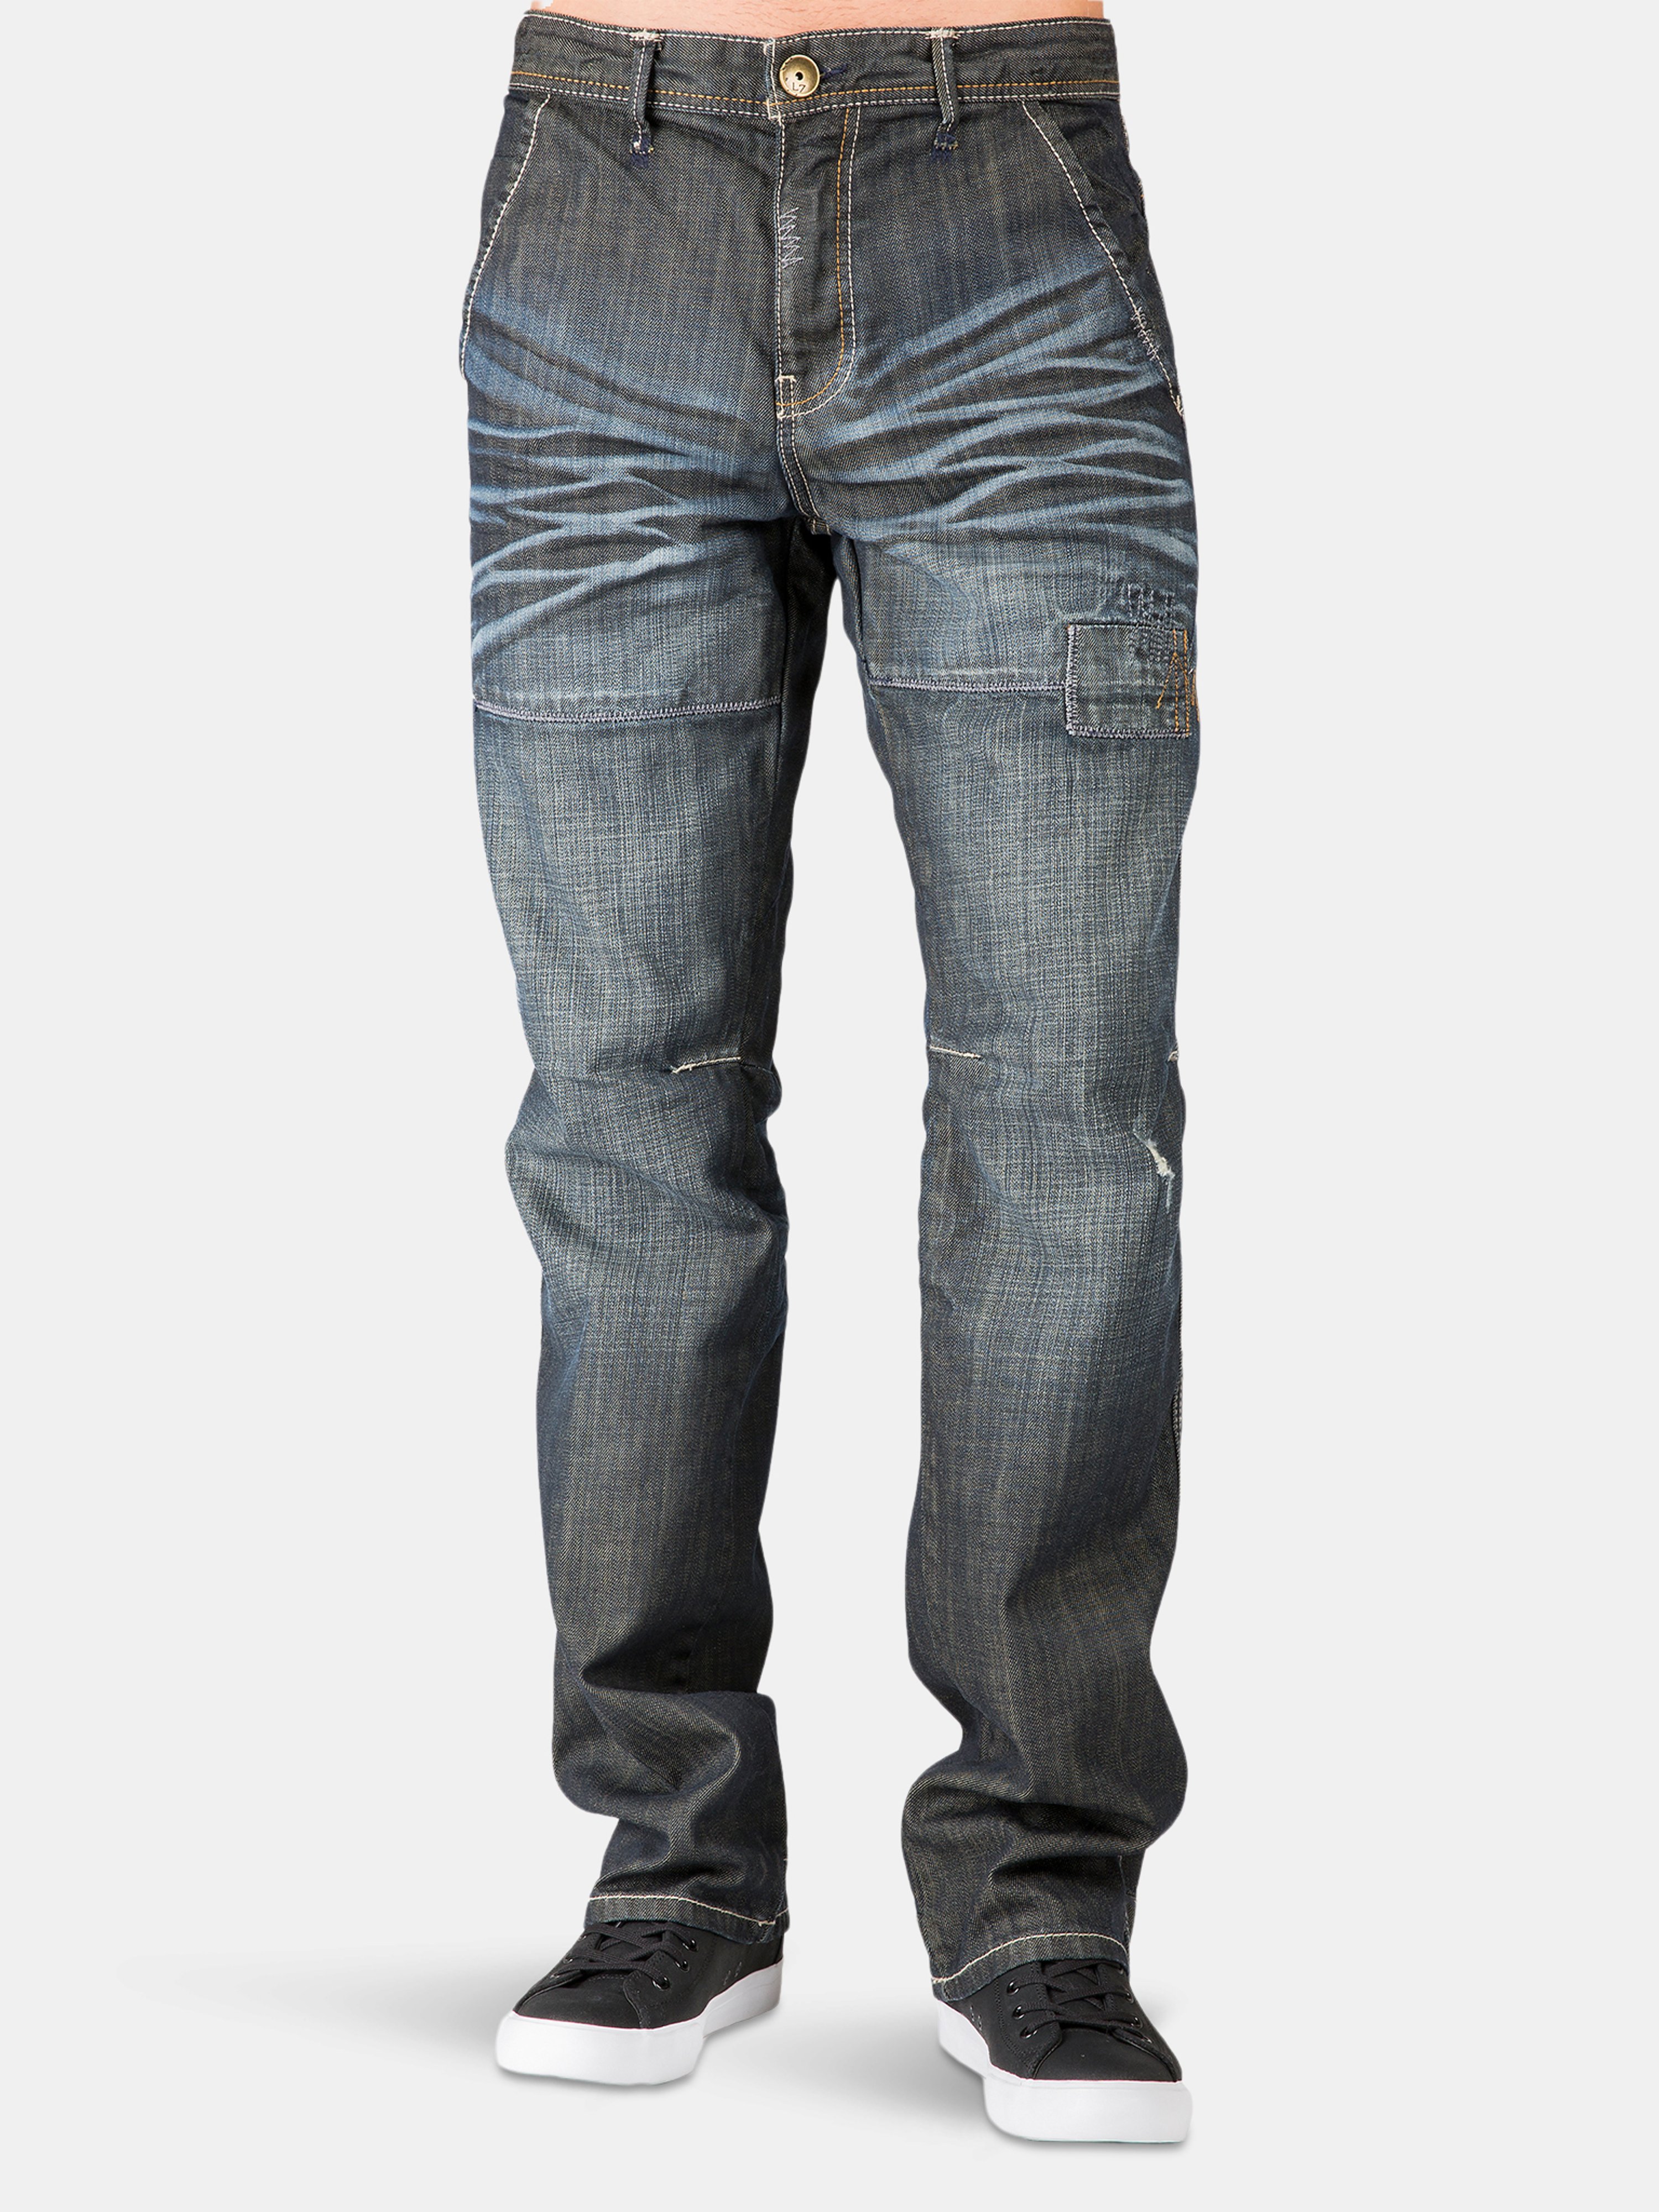 LEVEL 7 LEVEL 7 RELAXED STRAIGHT PREMIUM JEANS DARK STONE WASH RIPPED & REPAIRED